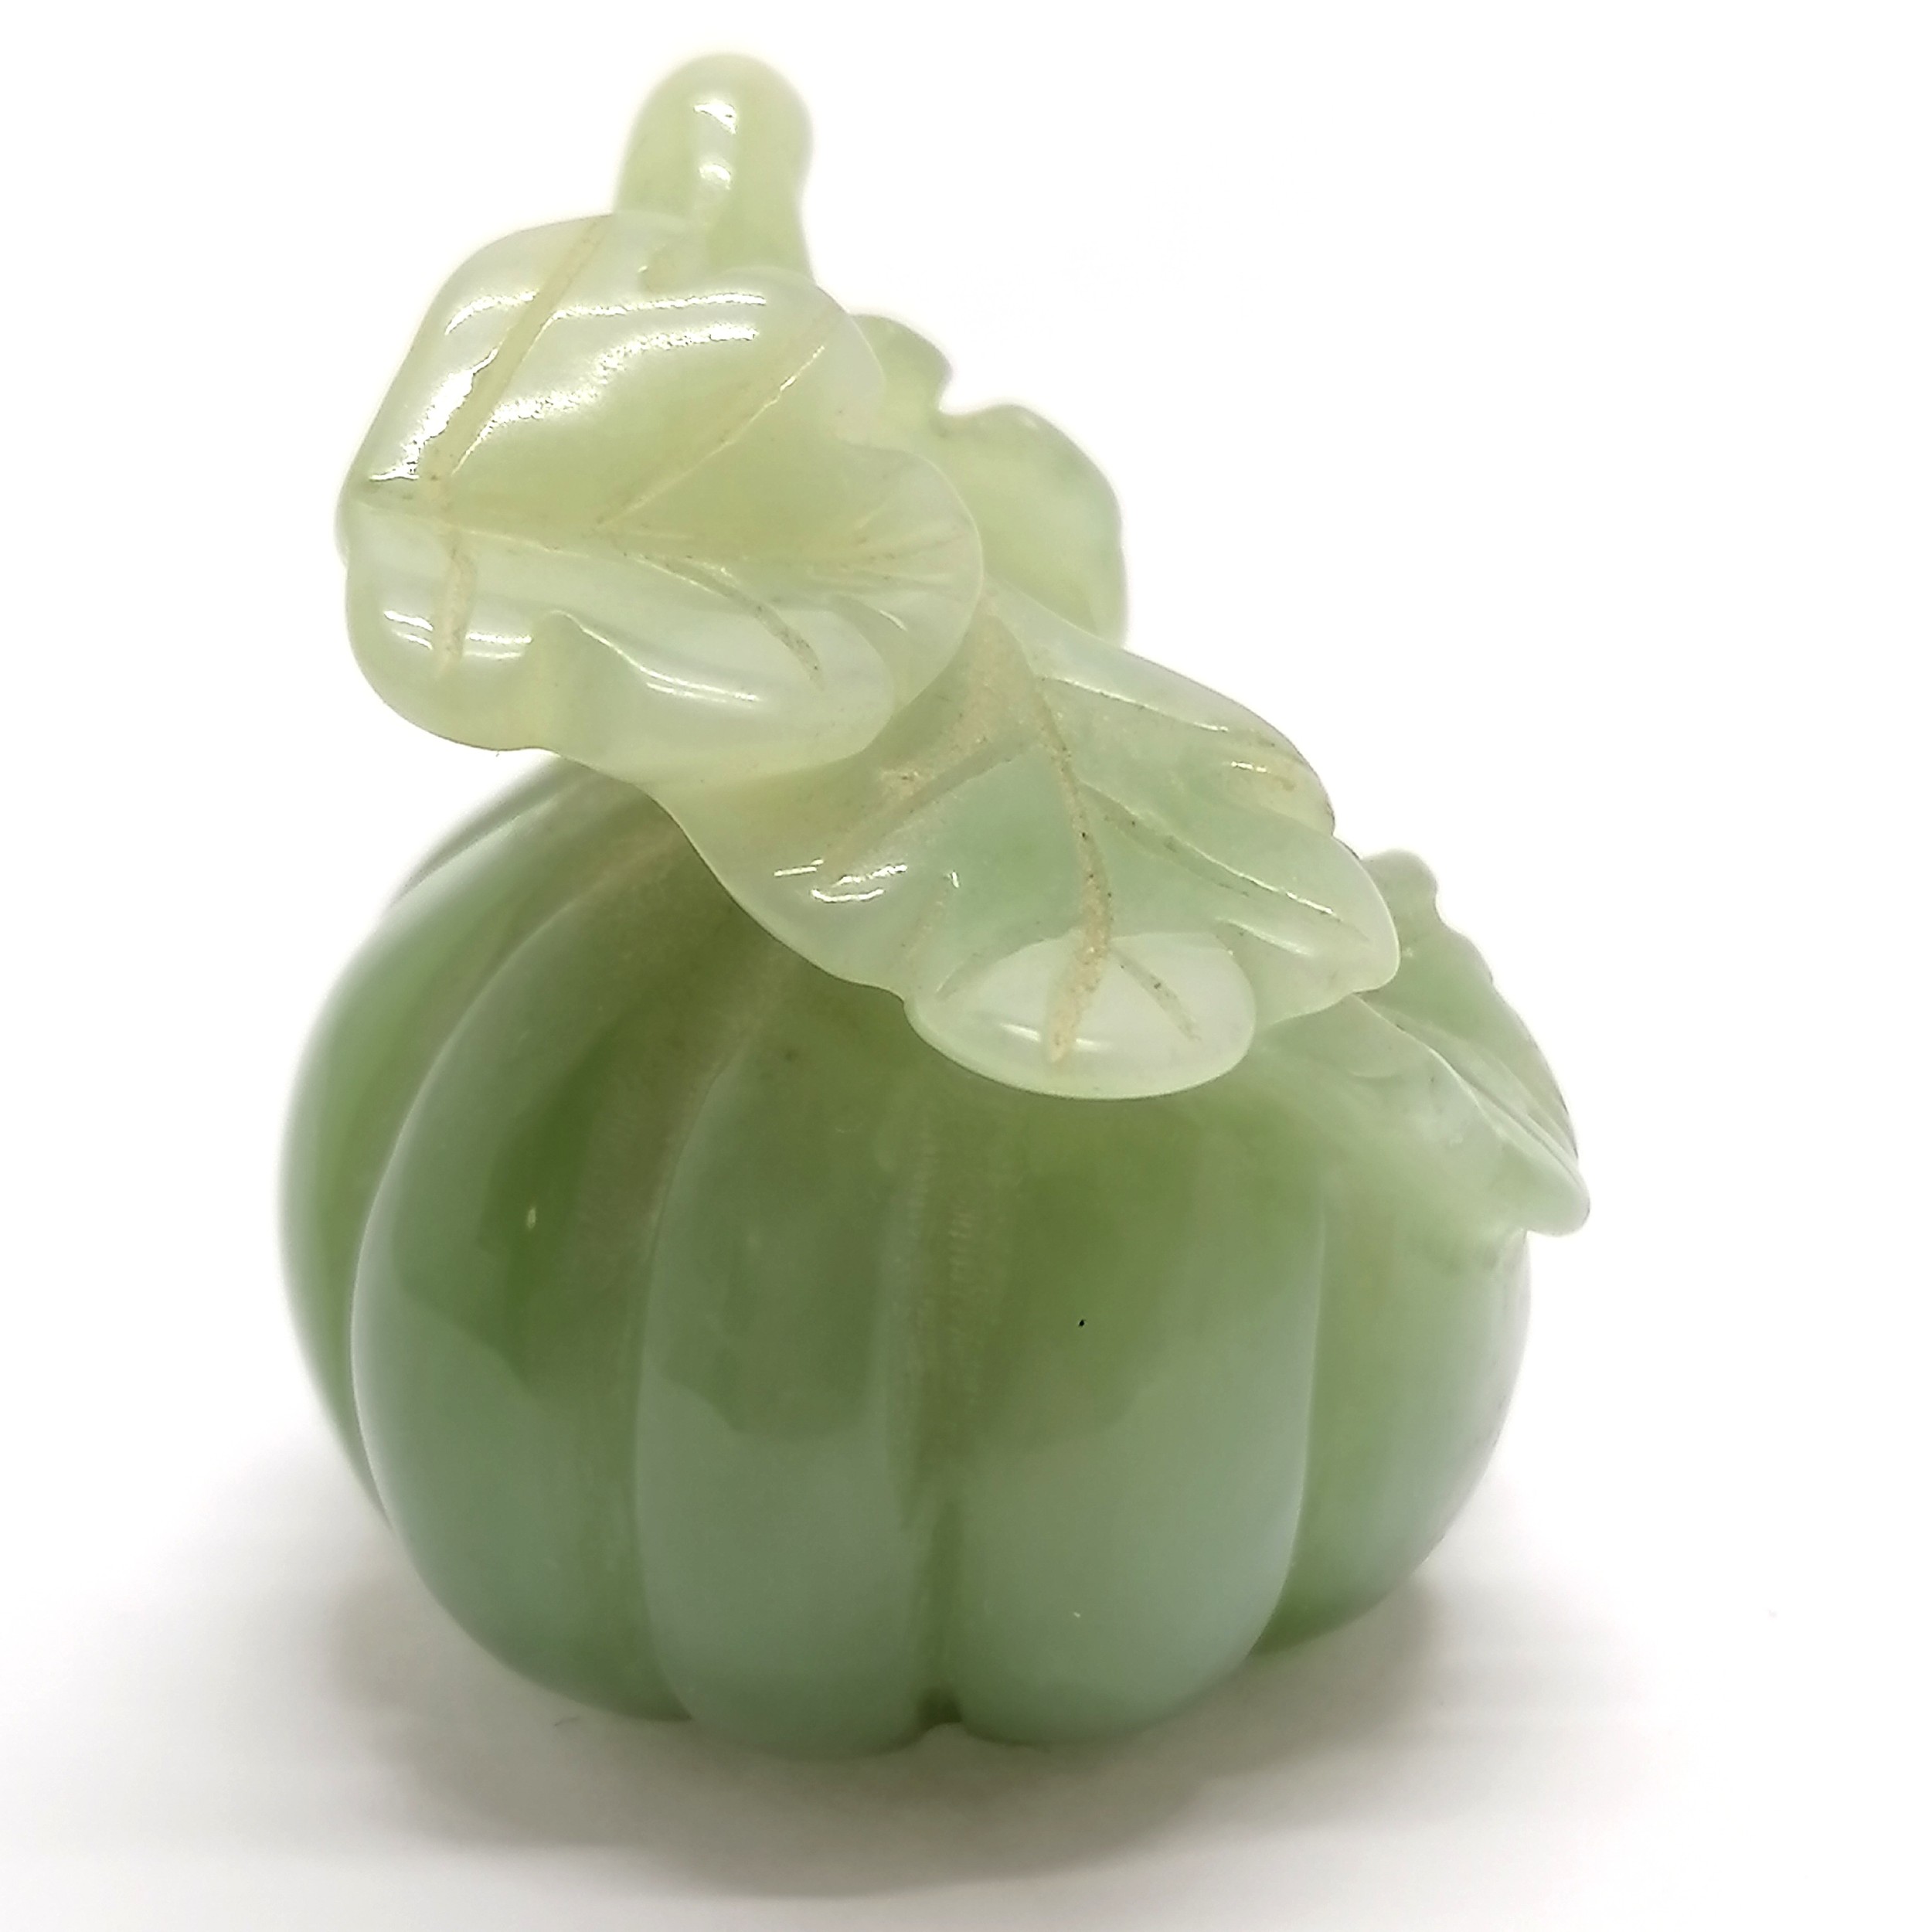 Oriental hand carved hardstone jade fruit with leaves - 4.5cm high & no obvious damage - Image 3 of 5